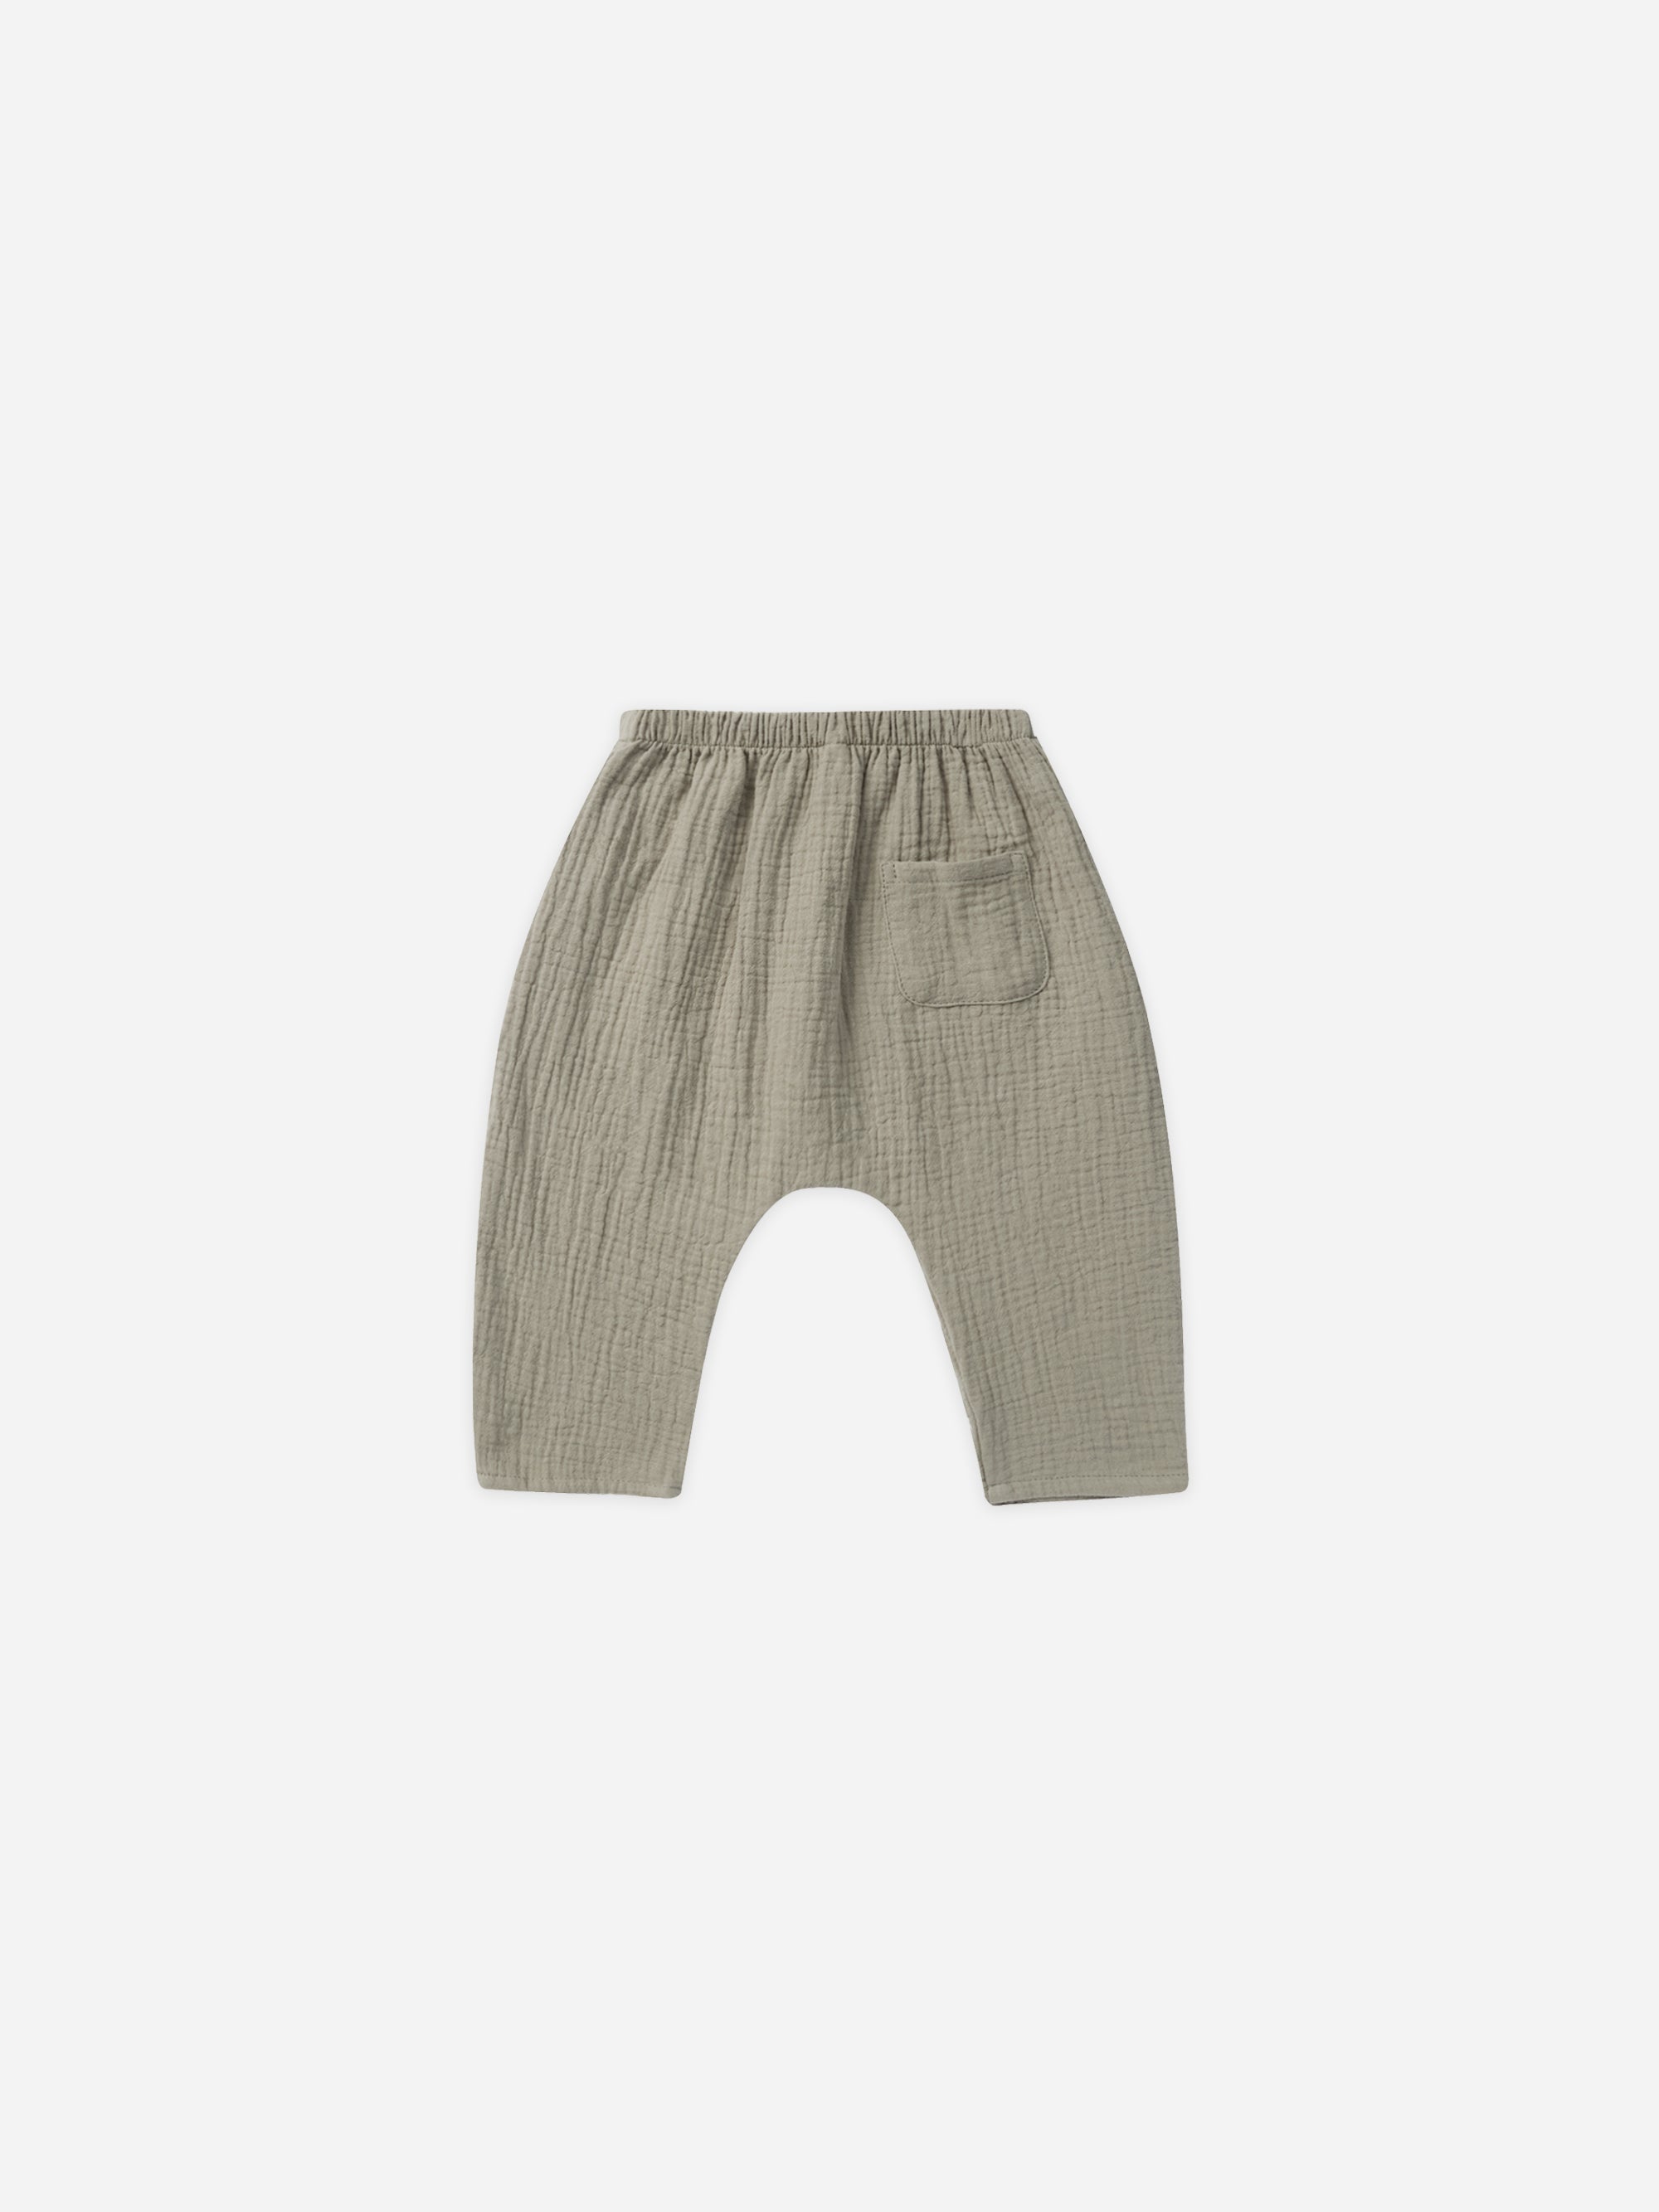 Rowan Pant || Sage - Rylee + Cru | Kids Clothes | Trendy Baby Clothes | Modern Infant Outfits |